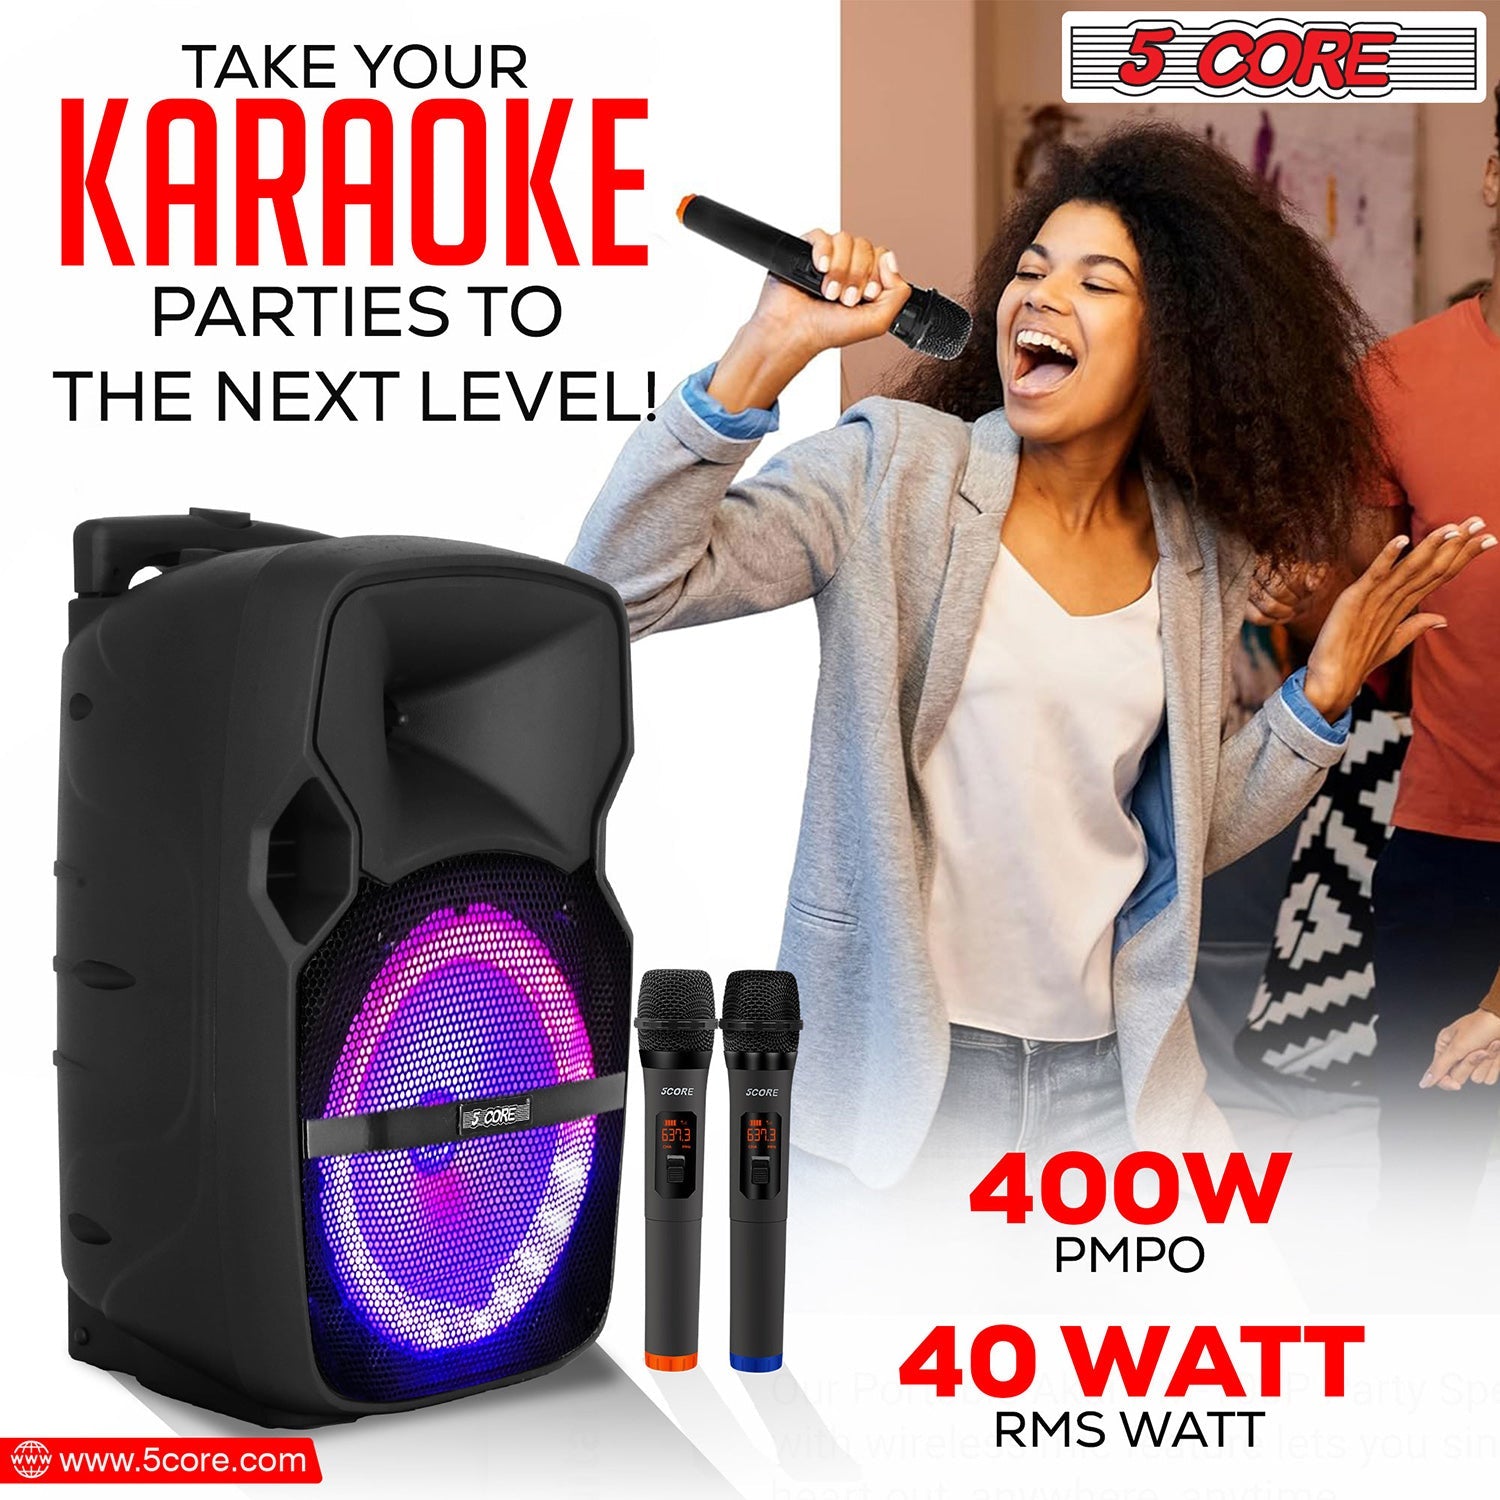 5Core Portable Party Speaker: Powerful PA system with Bluetooth, 2 wireless mics, ideal for DJ and karaoke events.